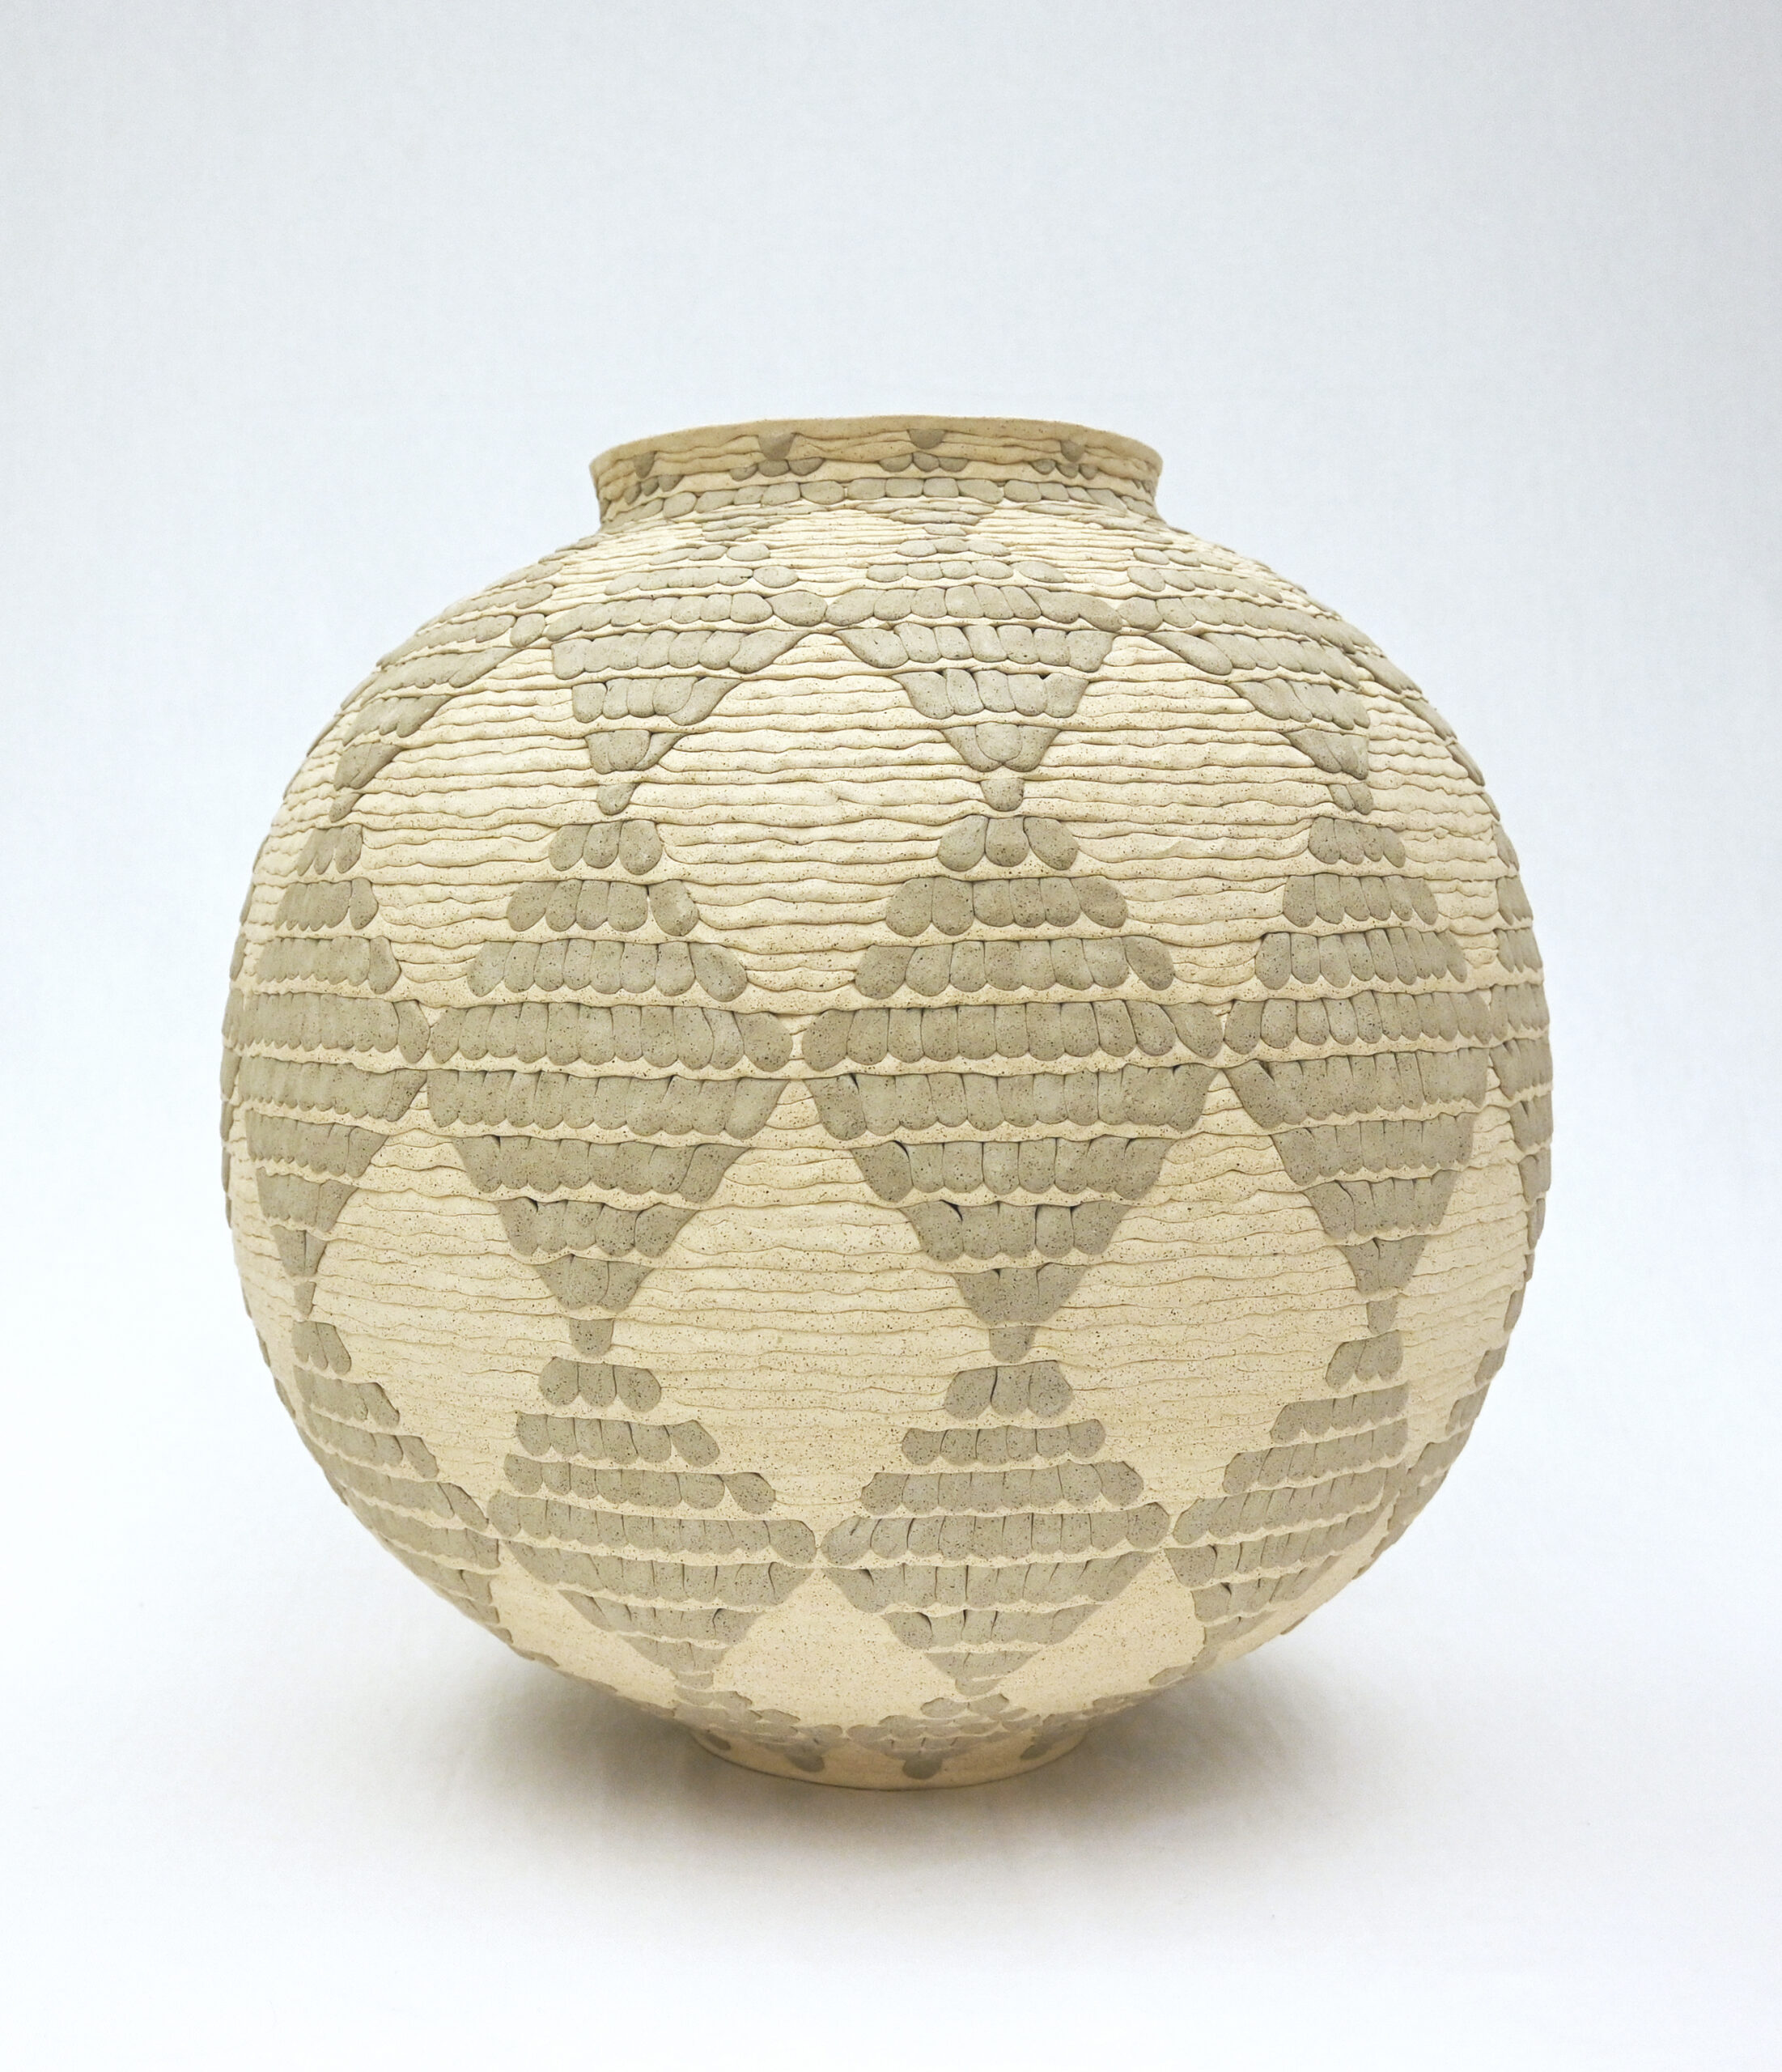 
							

									YoonJee Kwak									Patterned Memories, Moon-jar inspired vessel III 2024									Hand-built stoneware, colored stoneware<br />
18 x 18 x 18 inches									


							